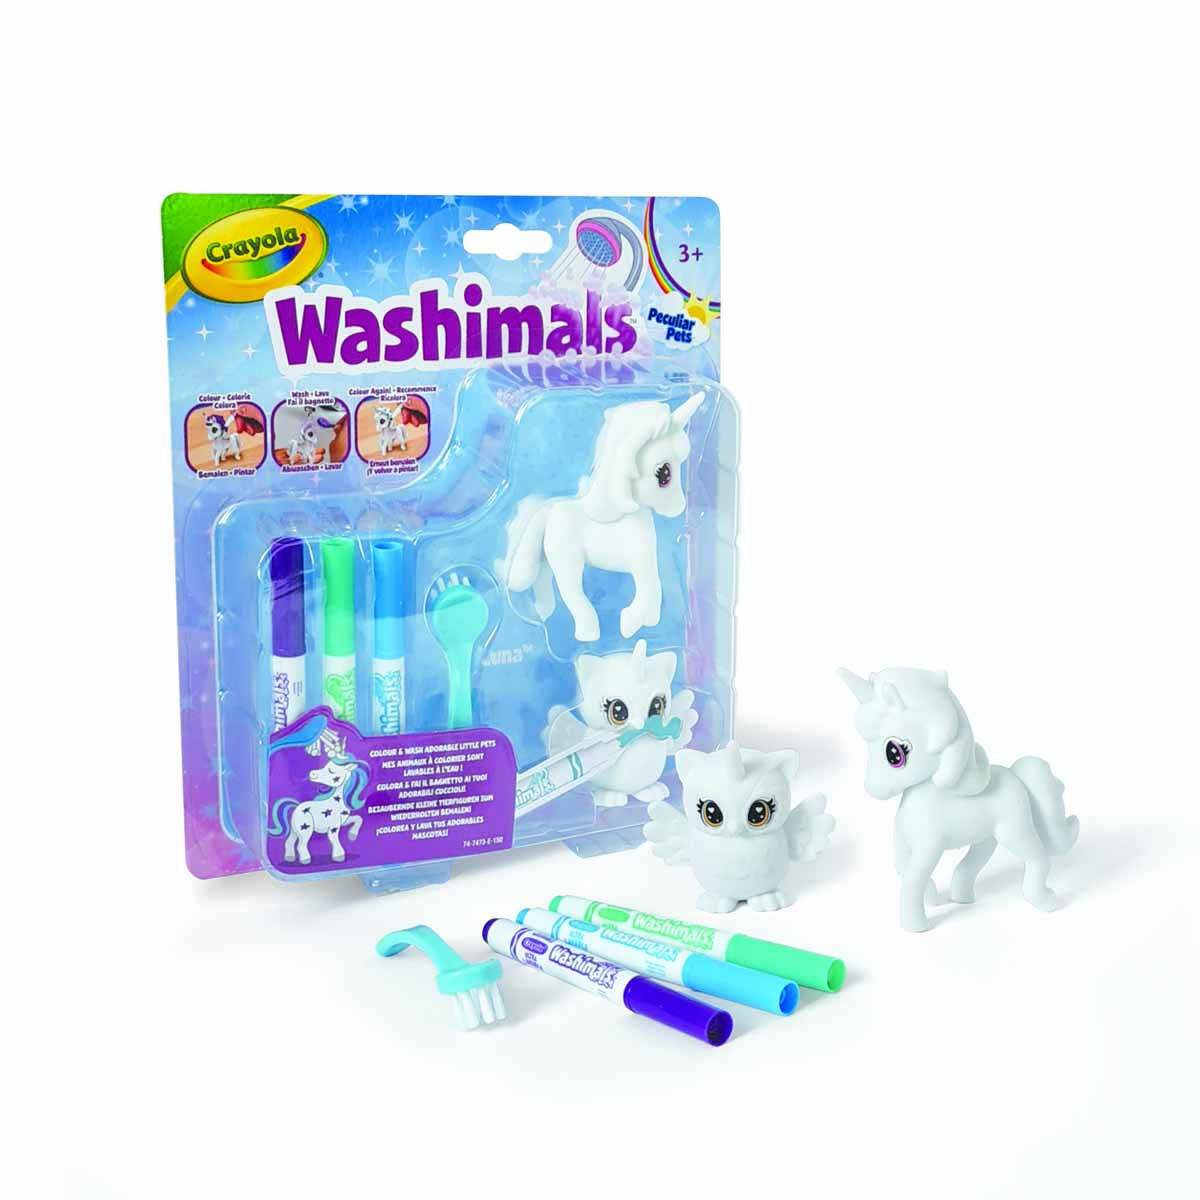 Painting set Crayola Washimals with 2 figures (3+years) - Alouette